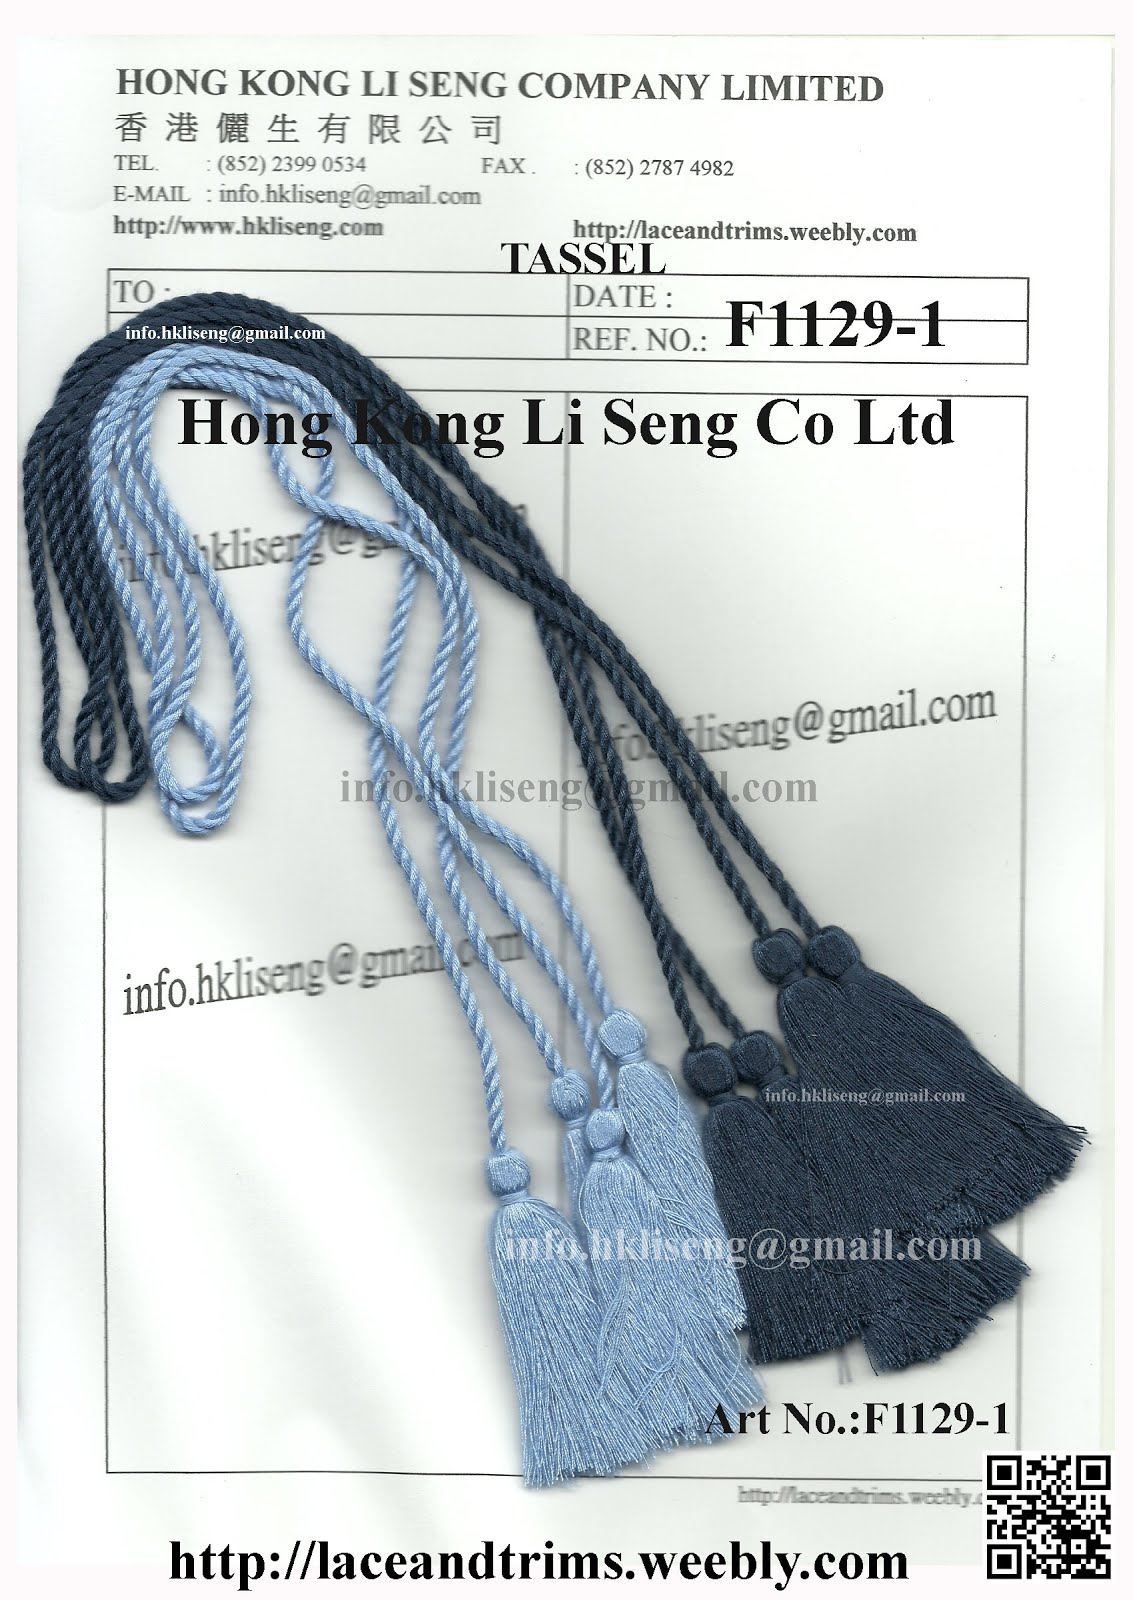 Major product Fringe and Tassel for all Kind Textile and Clothing Industry